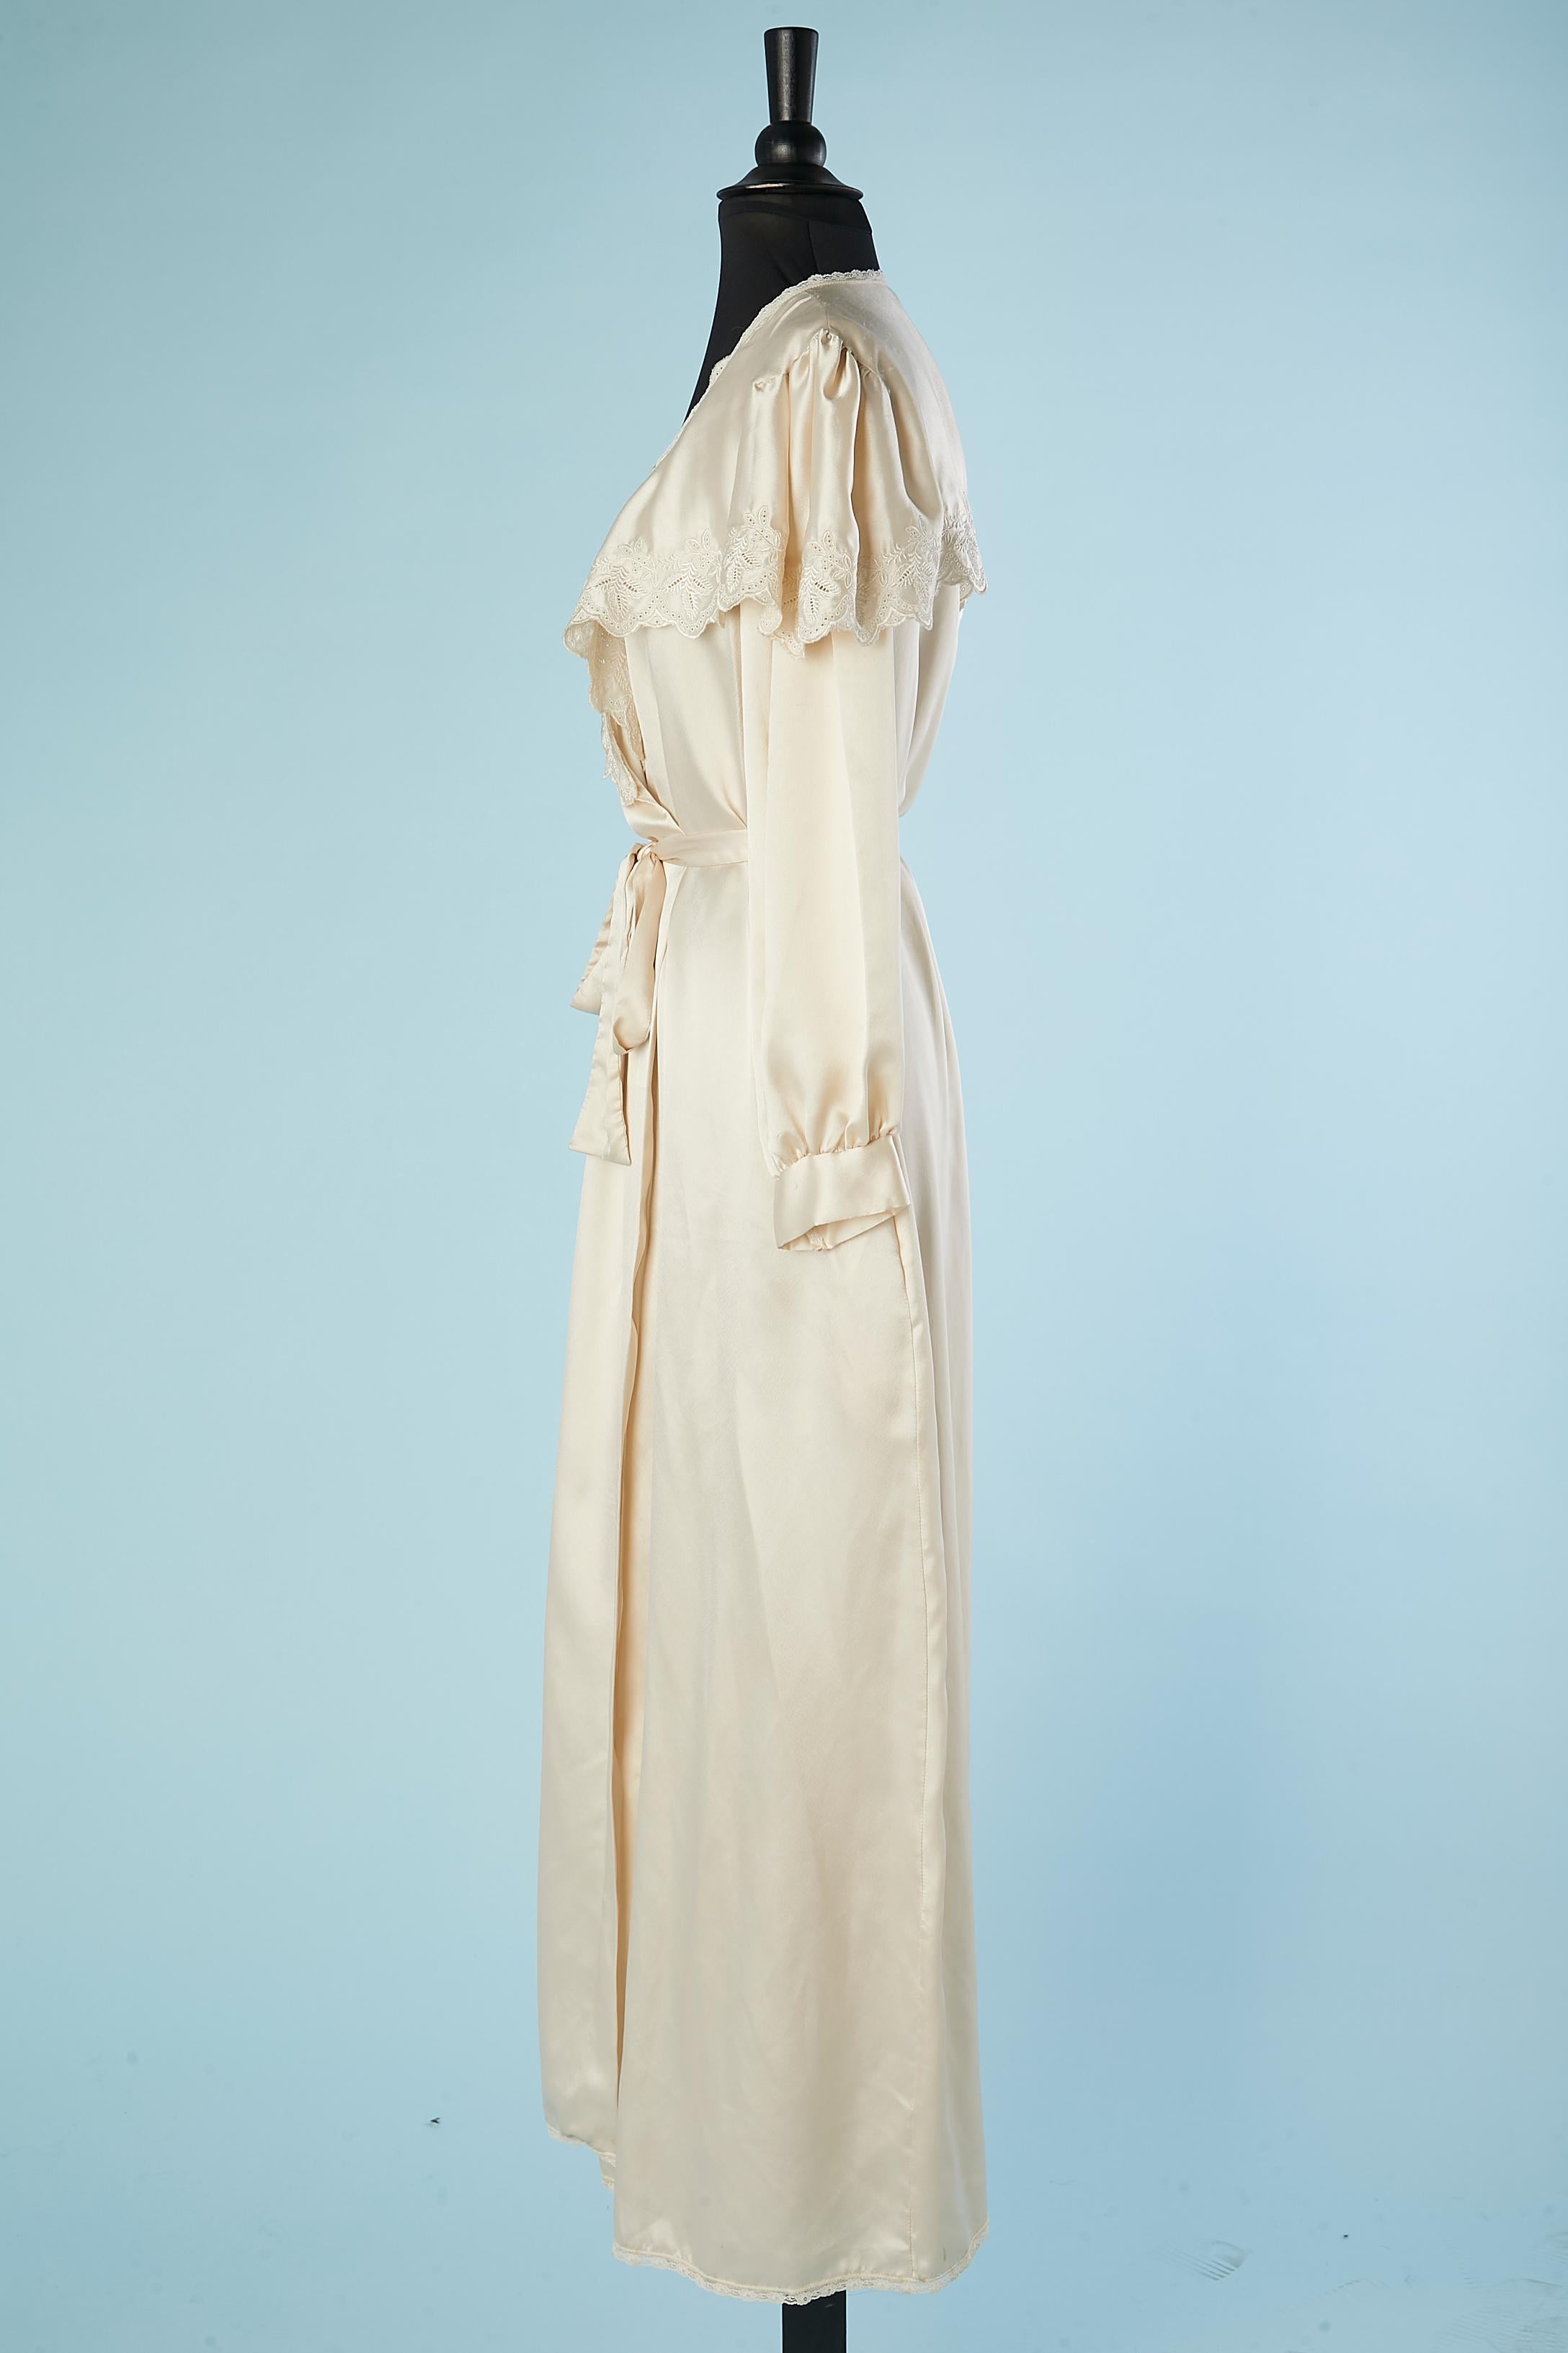 Women's Ivory Robe and nightgown with lace Miss Dior Paris New-York 